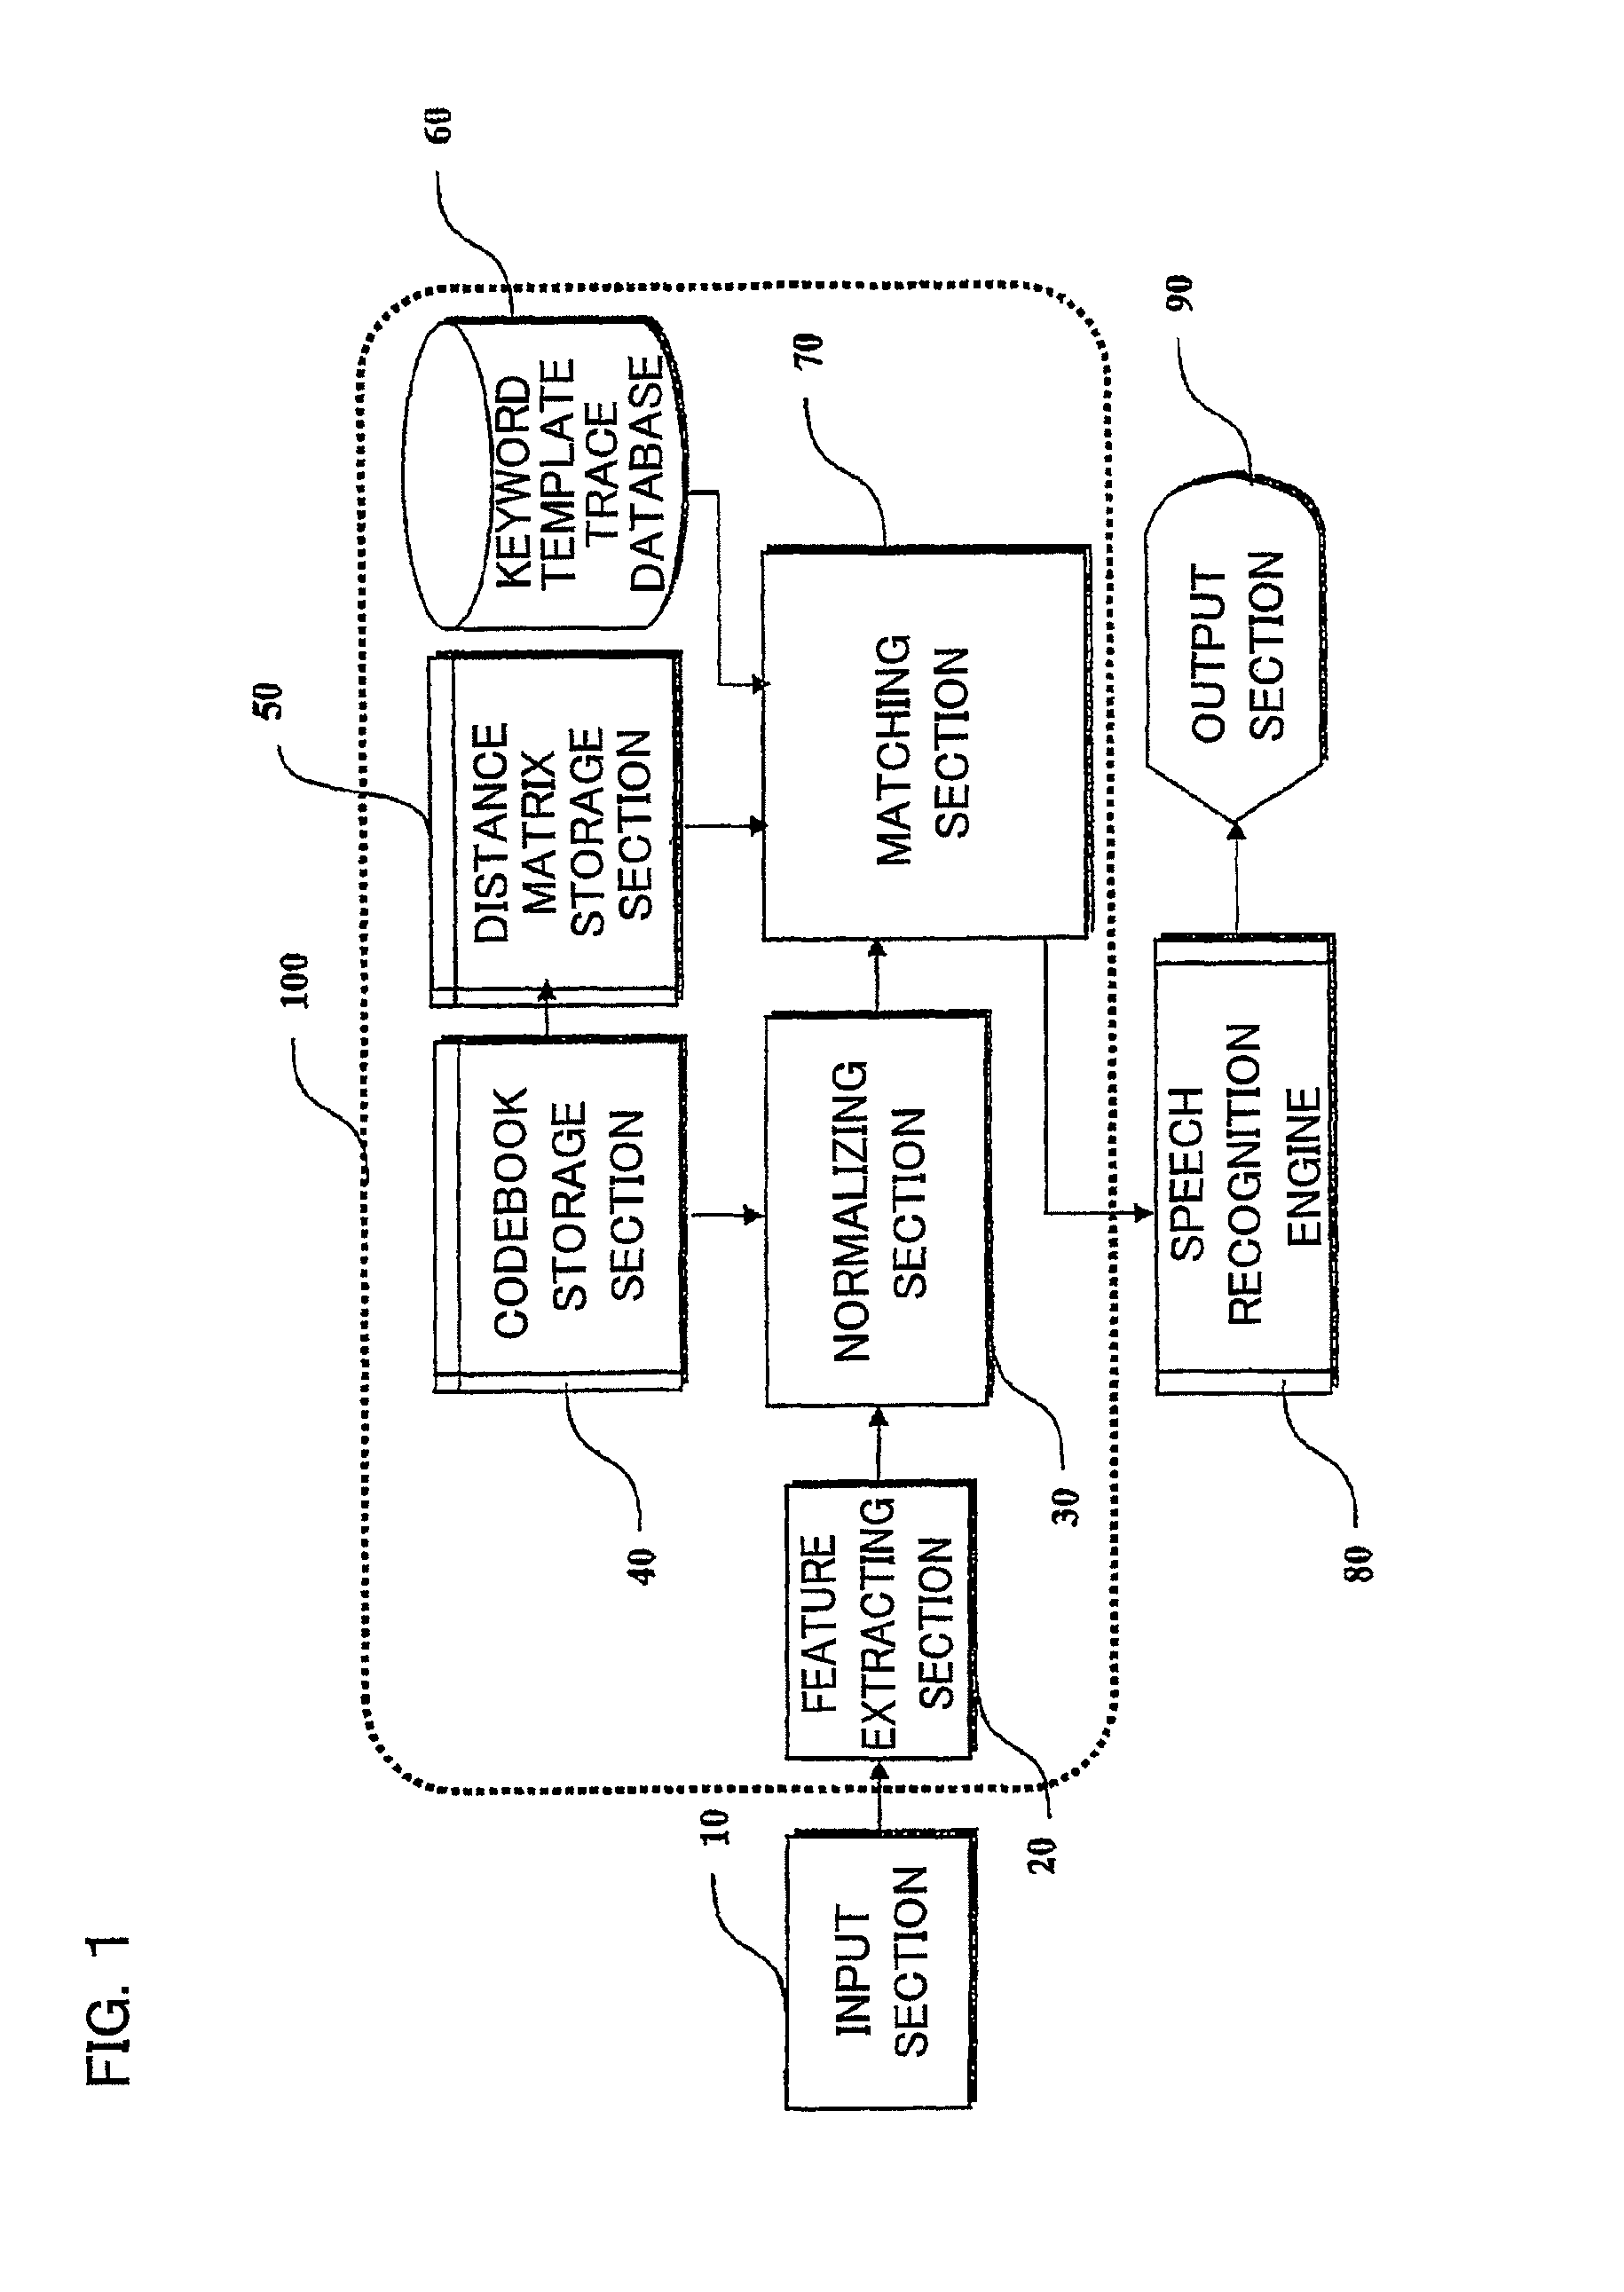 Method and apparatus for locating speech keyword and speech recognition system